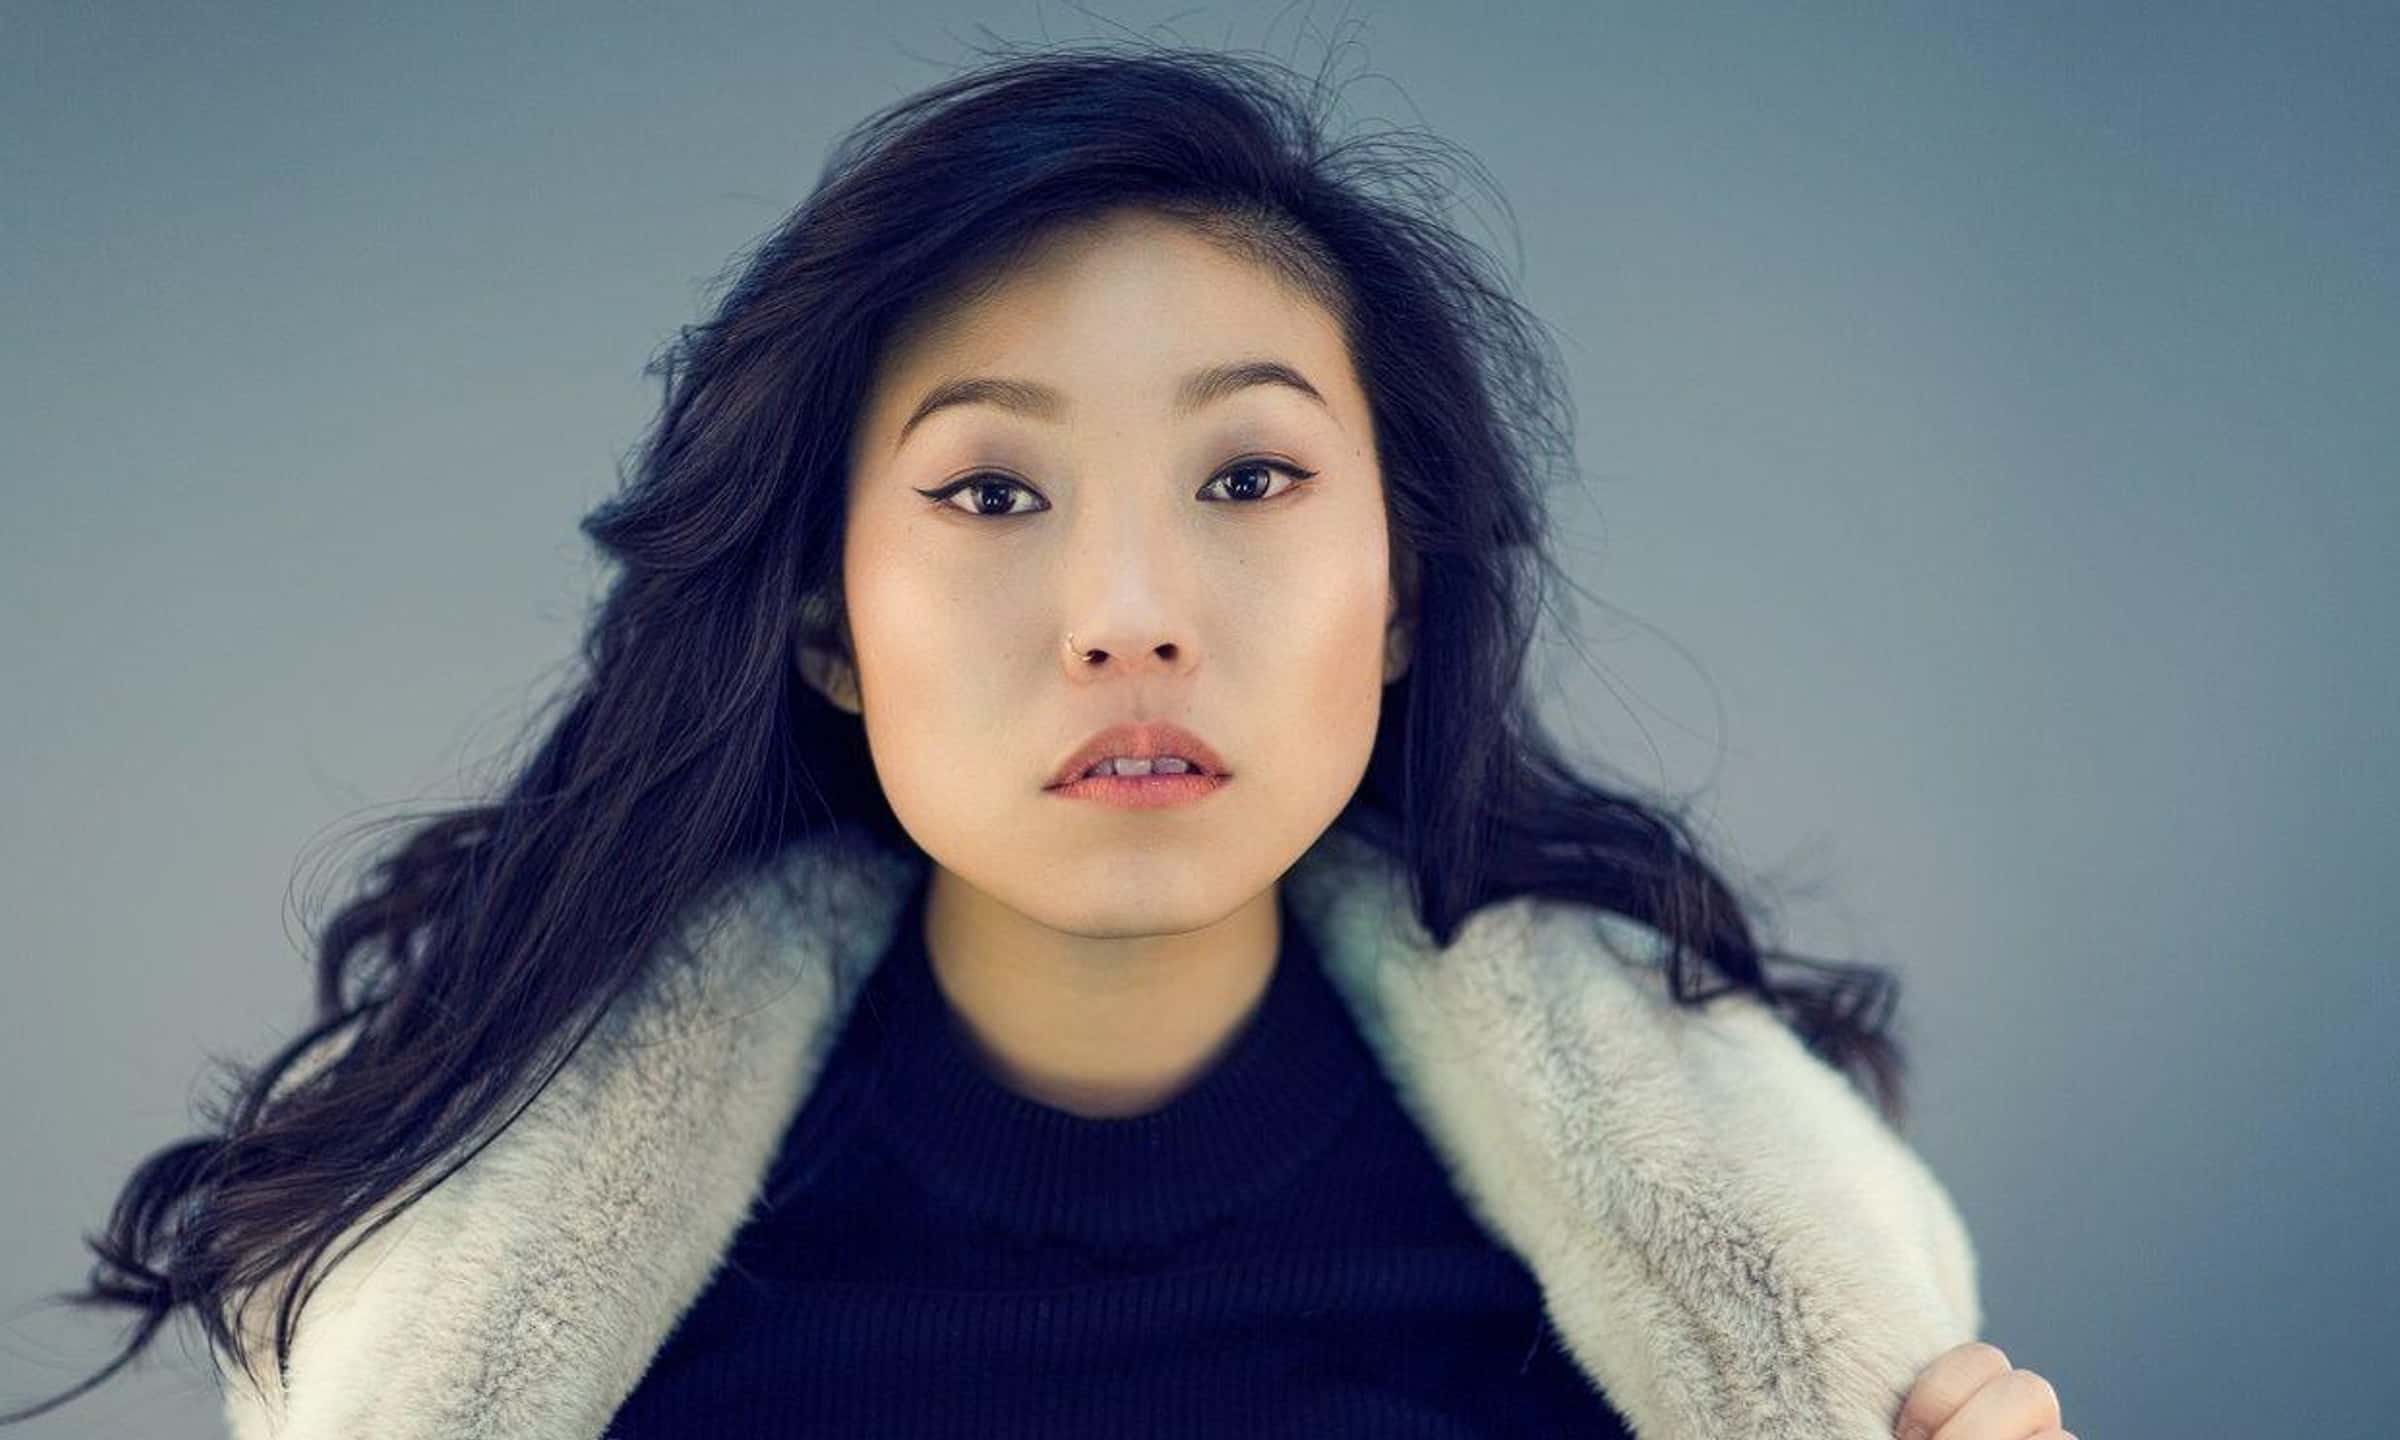 35 Facts about Awkwafina - Facts.net